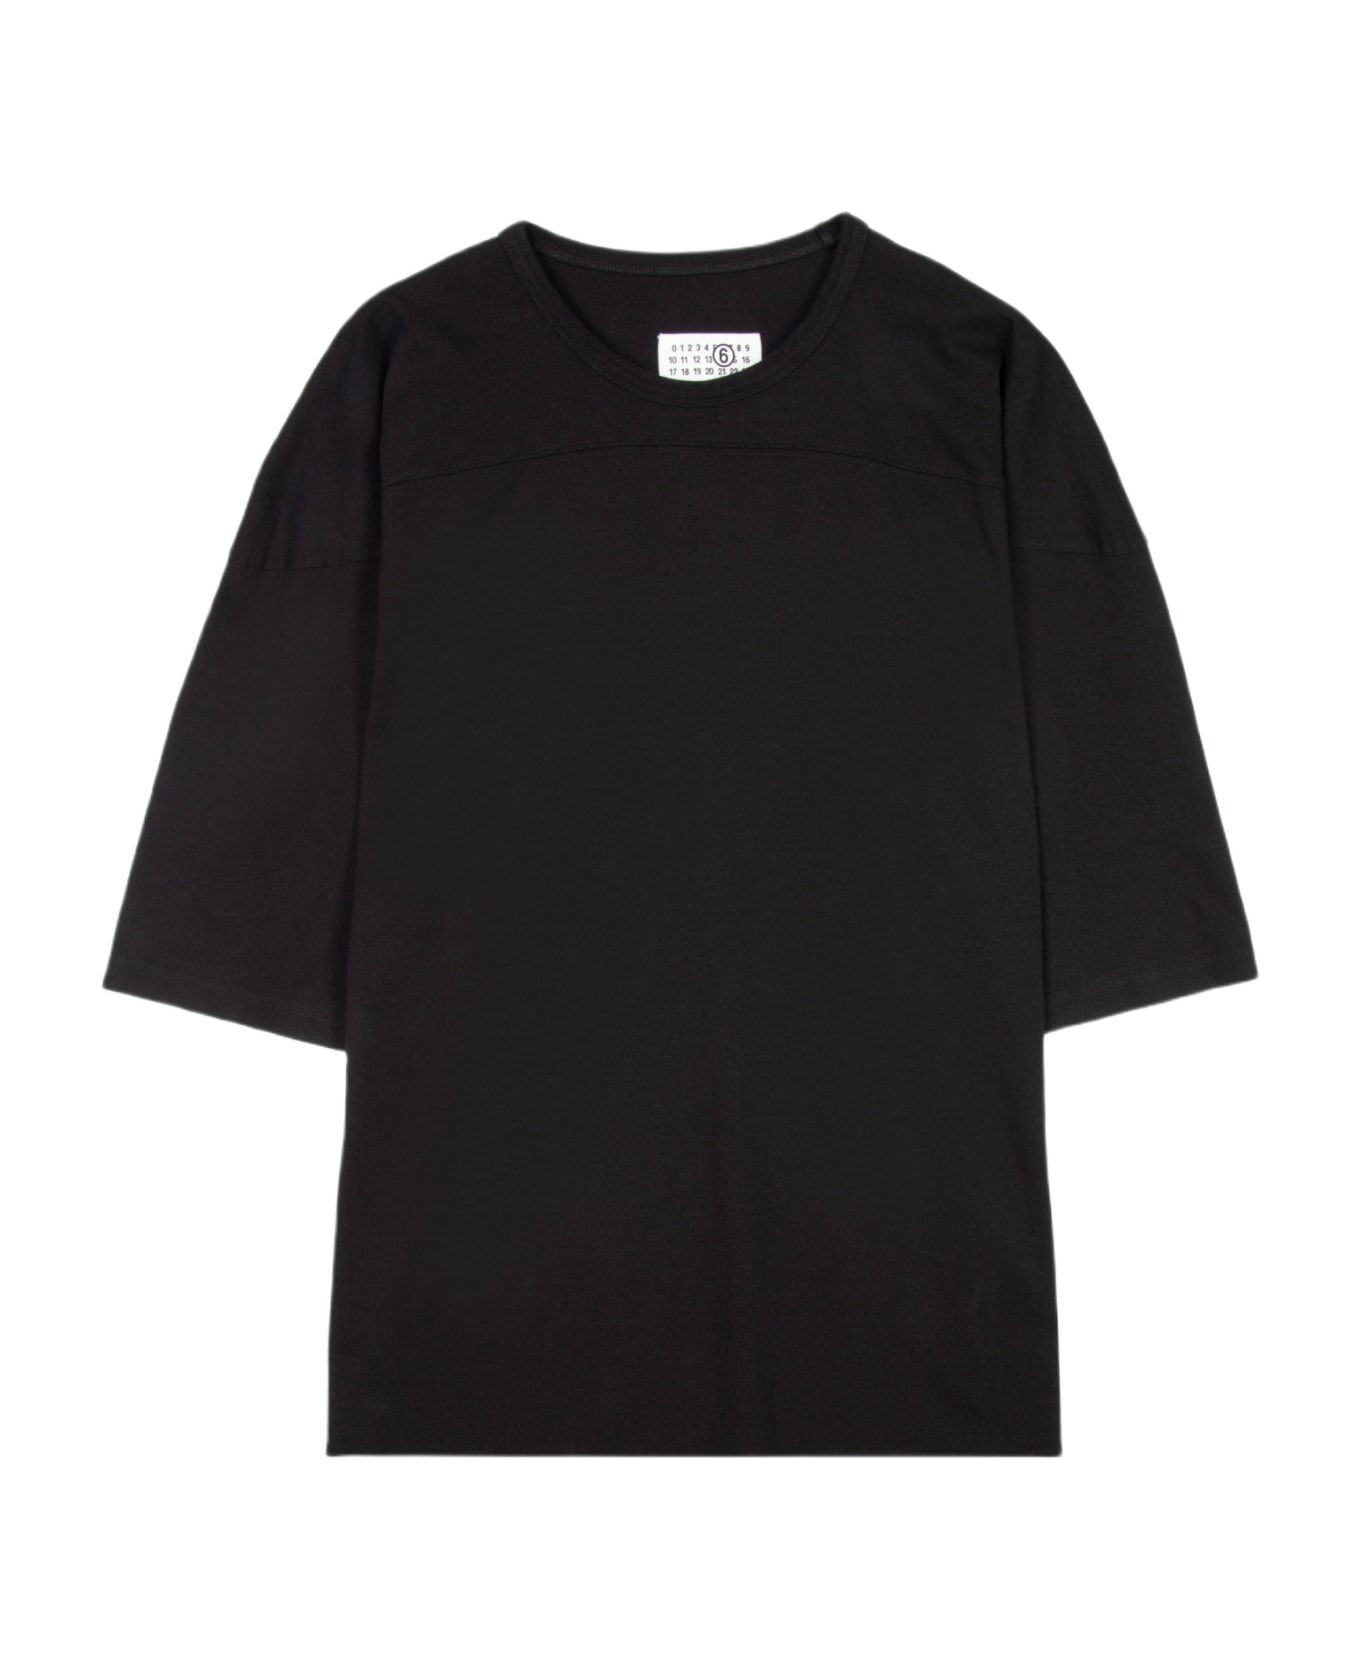 MM6 Maison Margiela T-shirt Black Relaxed T-shirt With 3/4 Sleeves Lenght - Nero